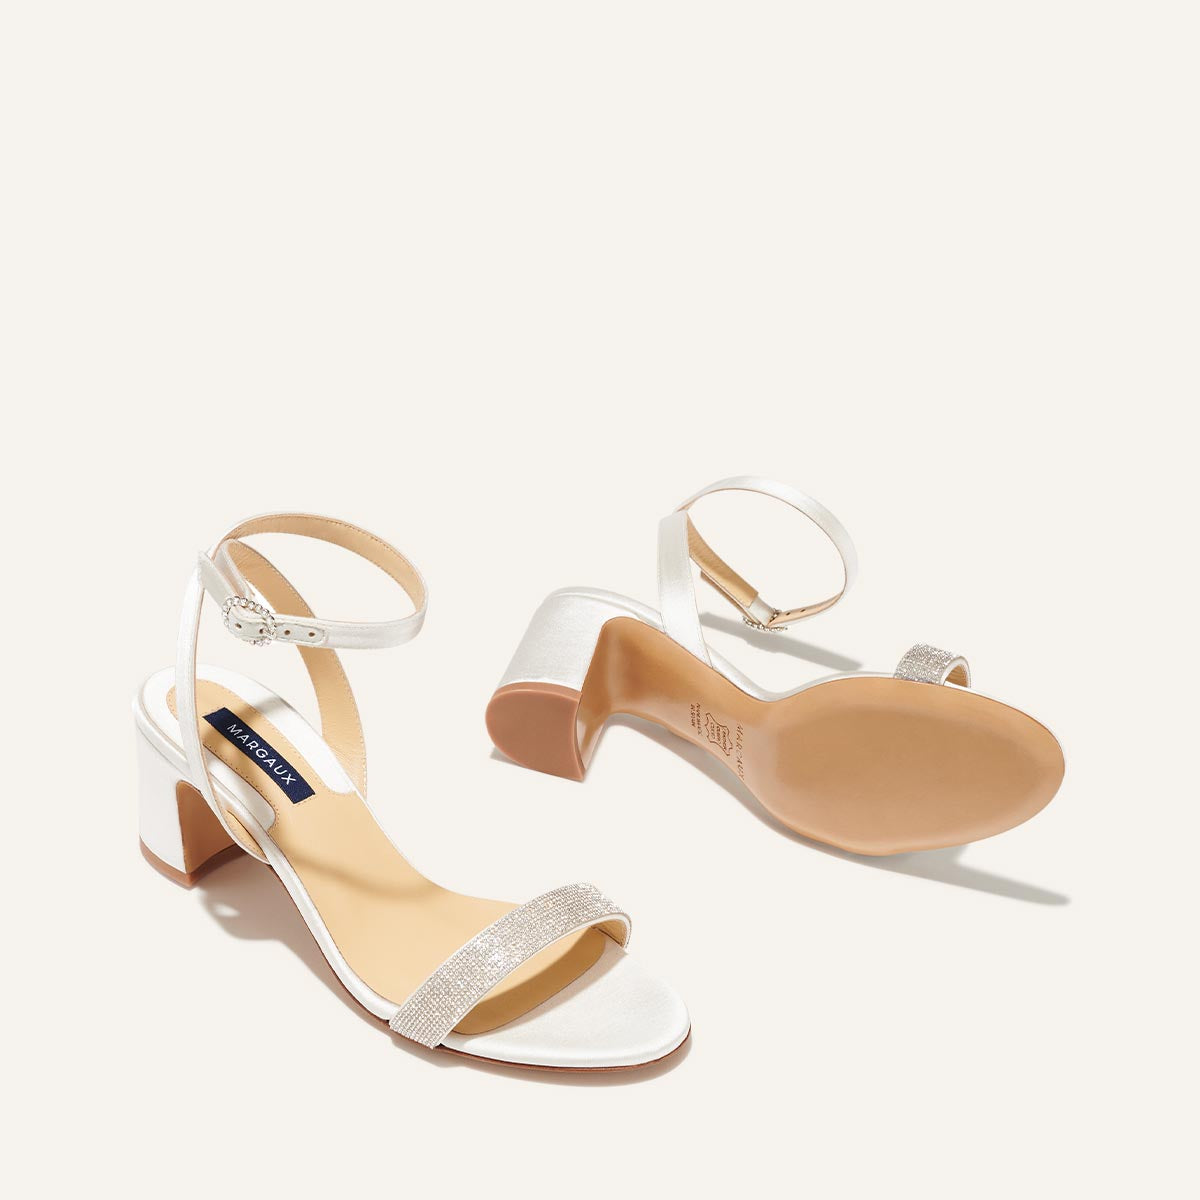 The Stella Sandal - Ivory Satin with Crystals